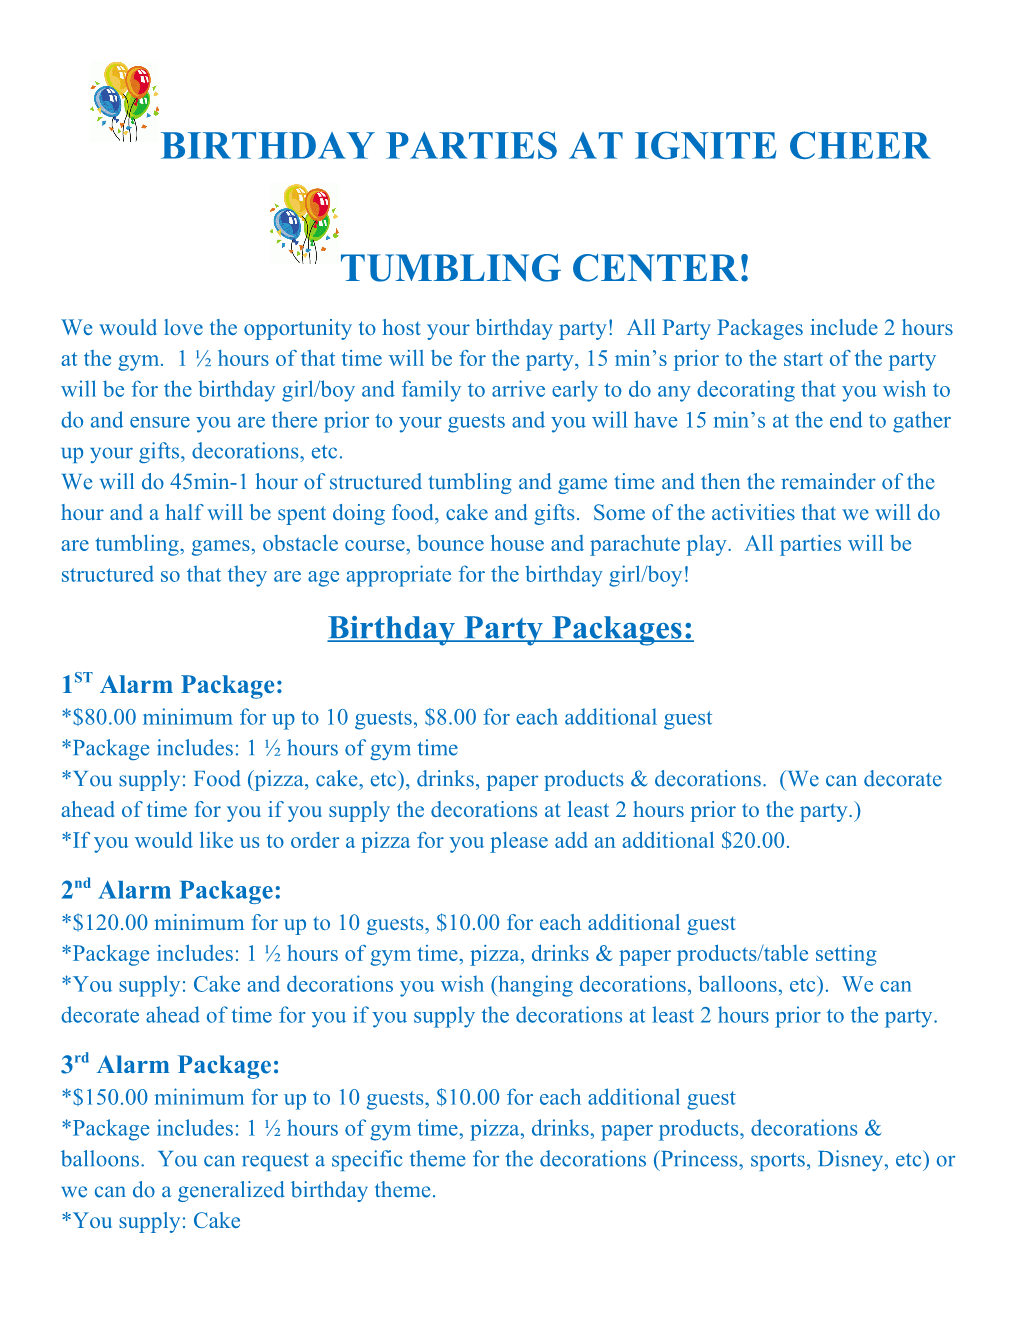 Birthday Party Packages